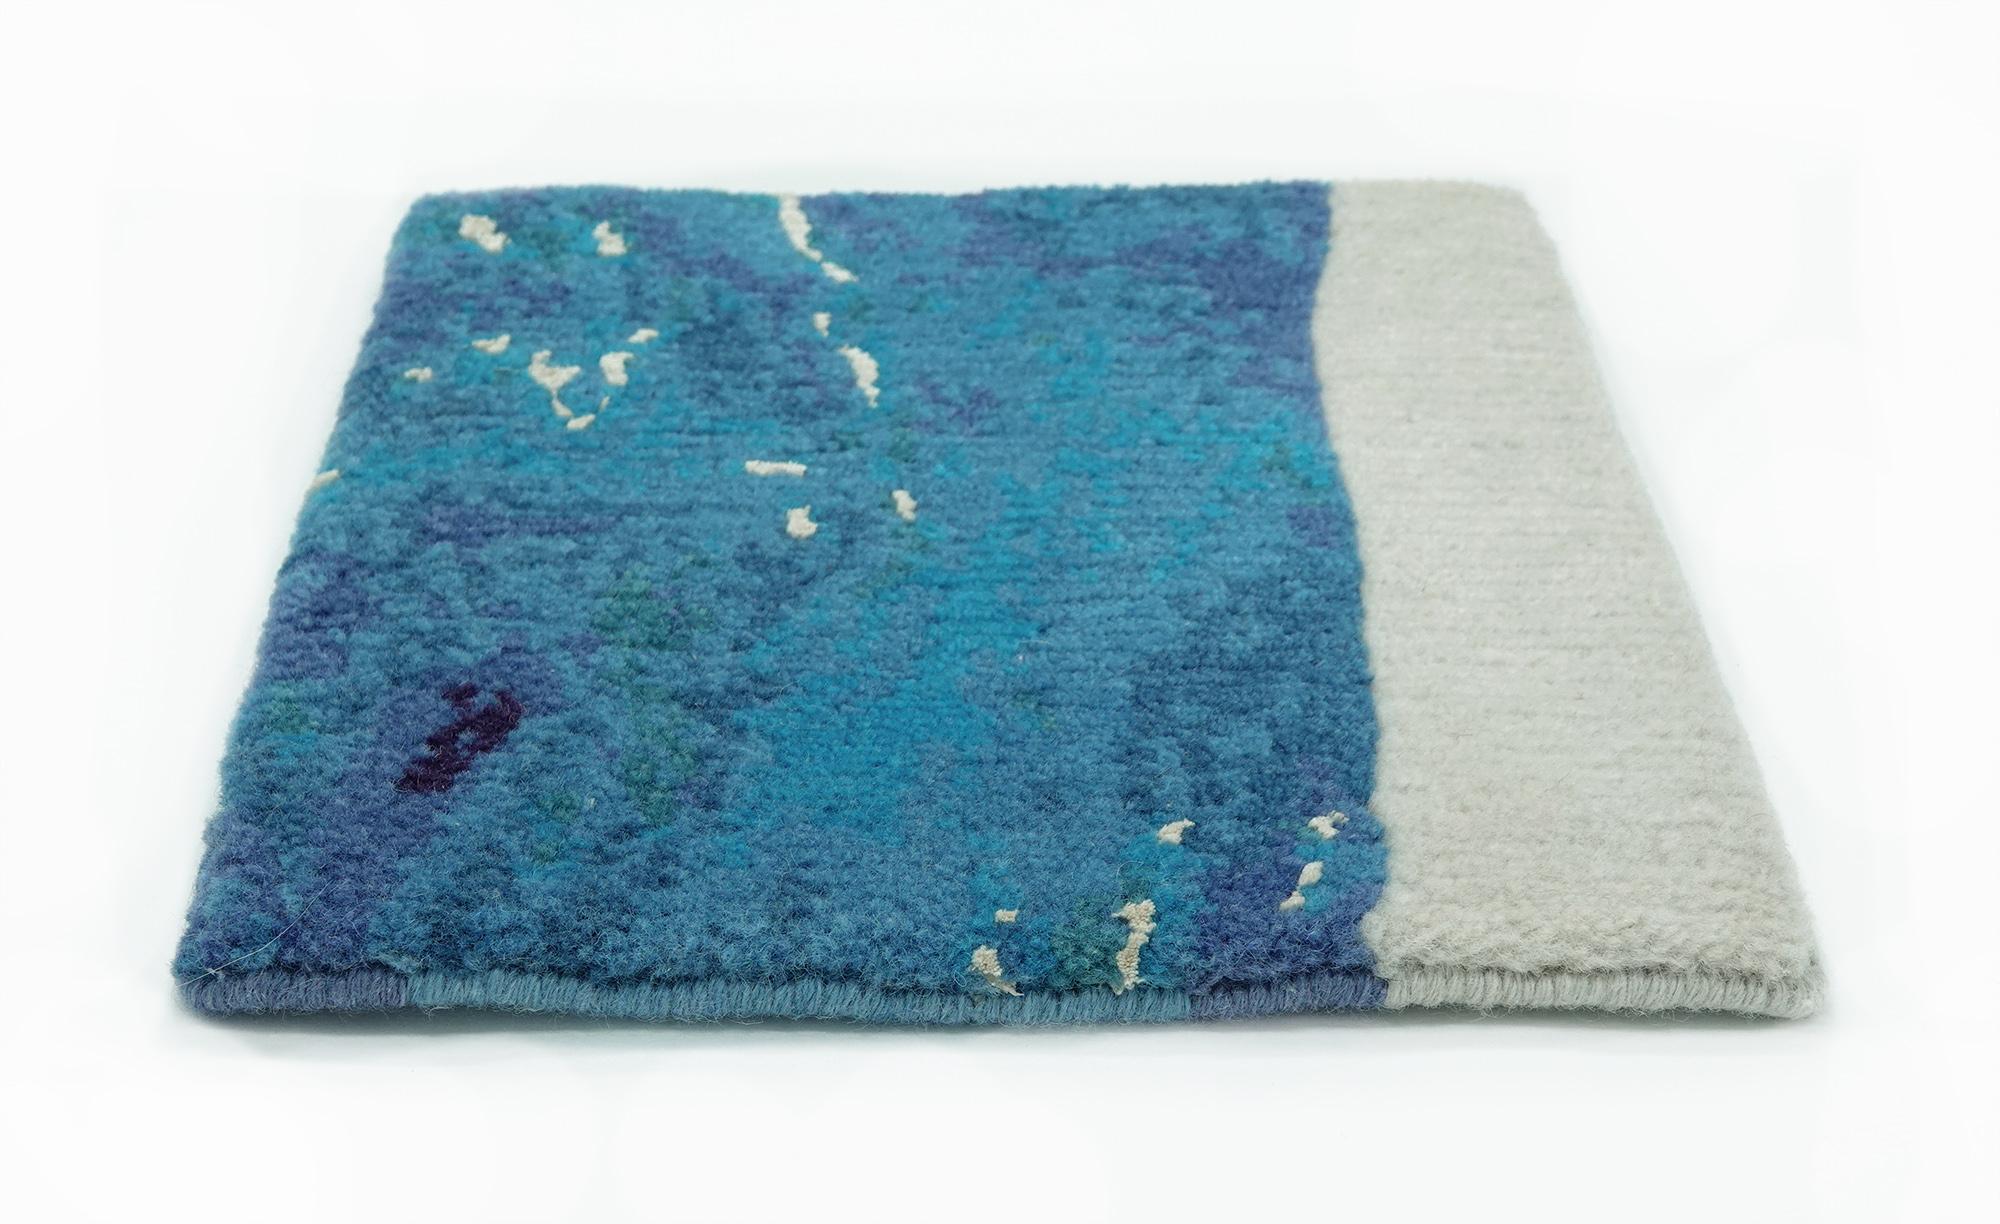 Wool Rug Blue Bright Irregular shape unusual Hand-Knotted - Magnetic Soil small For Sale